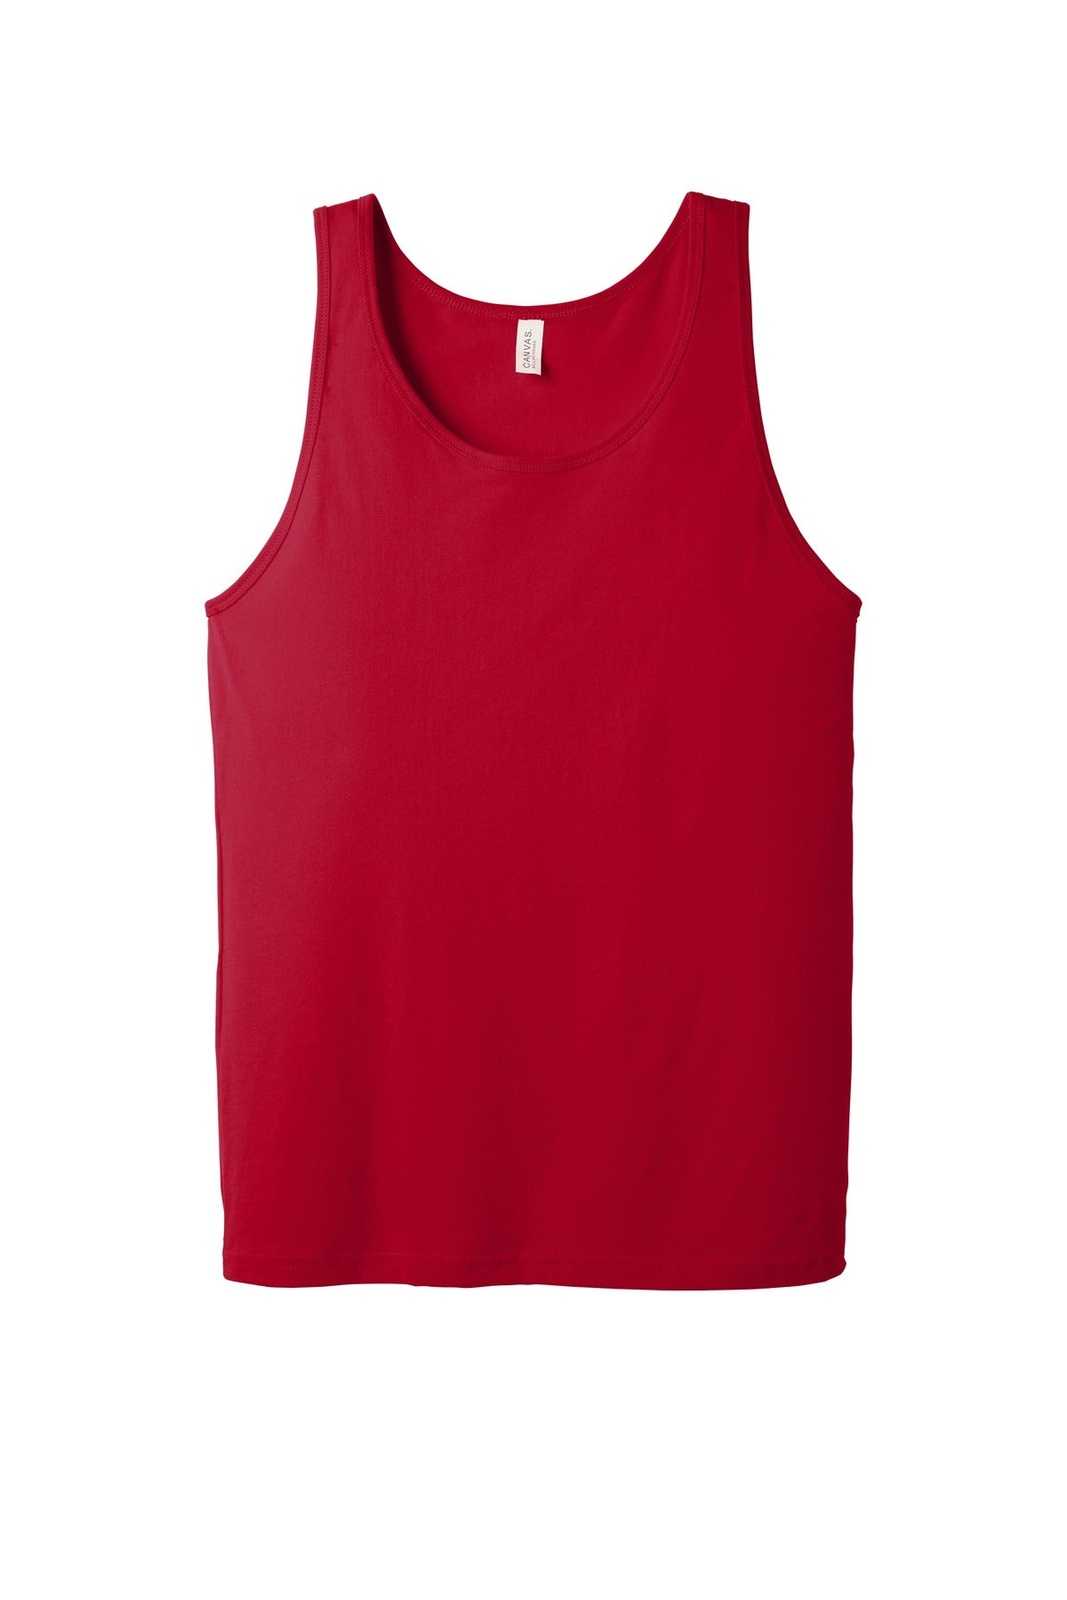 Bella + Canvas 3480 Unisex Jersey Tank - Red - HIT a Double